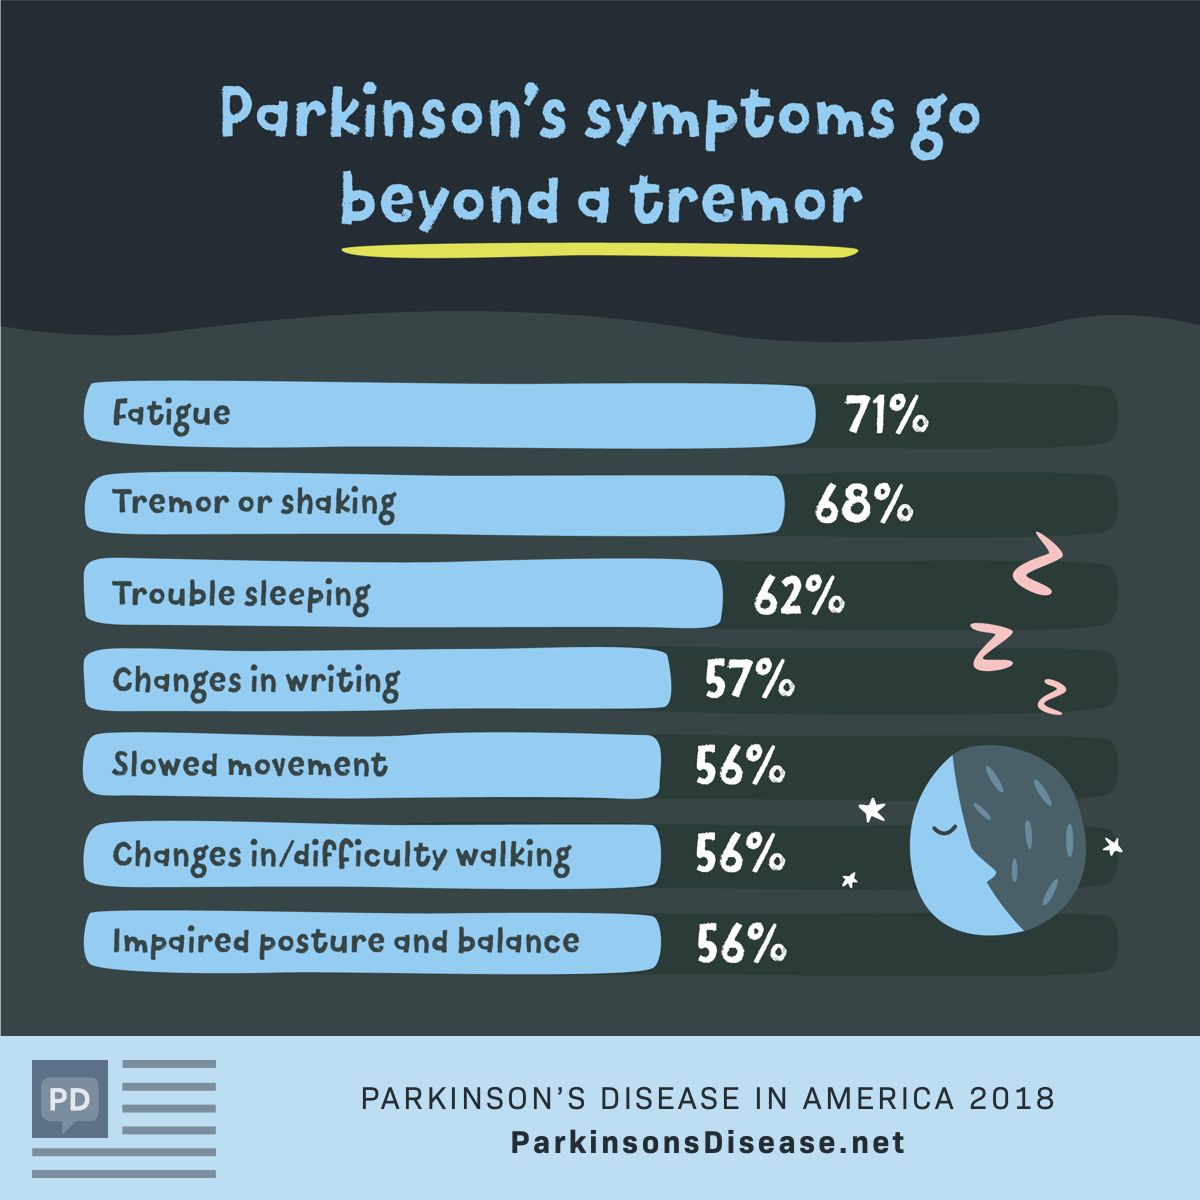 Parkinsonâs DiseaseâComing to Terms with the âNew Meâ?